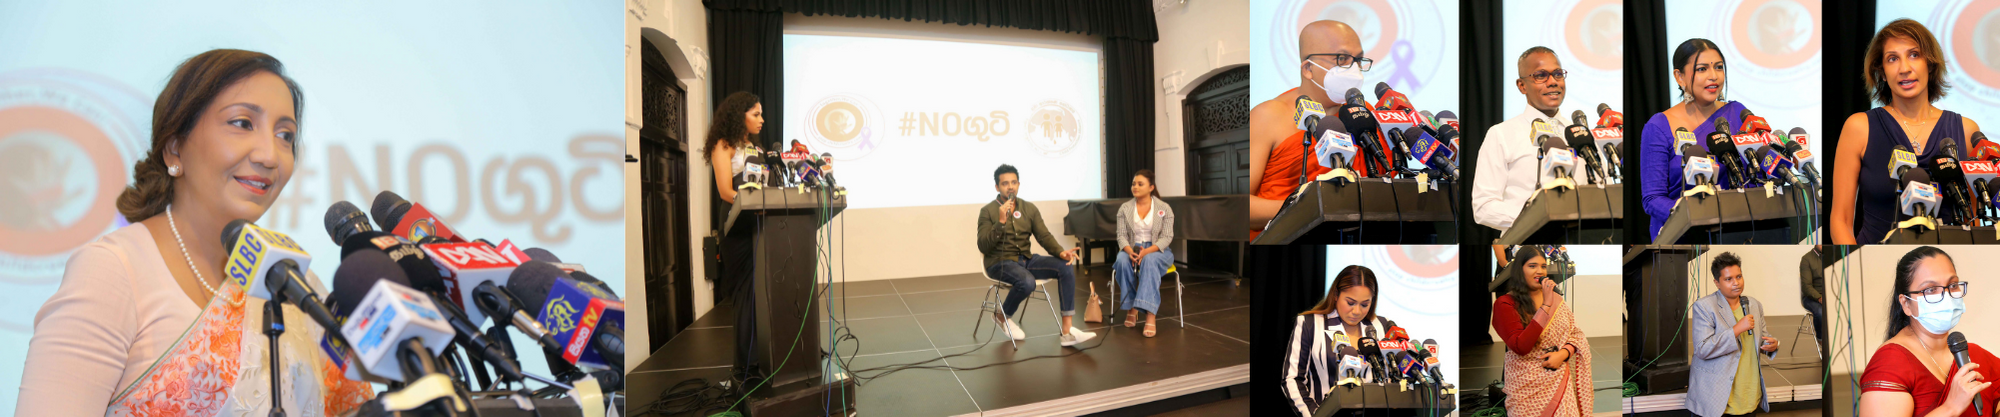 #NOගුටි Launched to End Violence Against Children in Sri Lanka